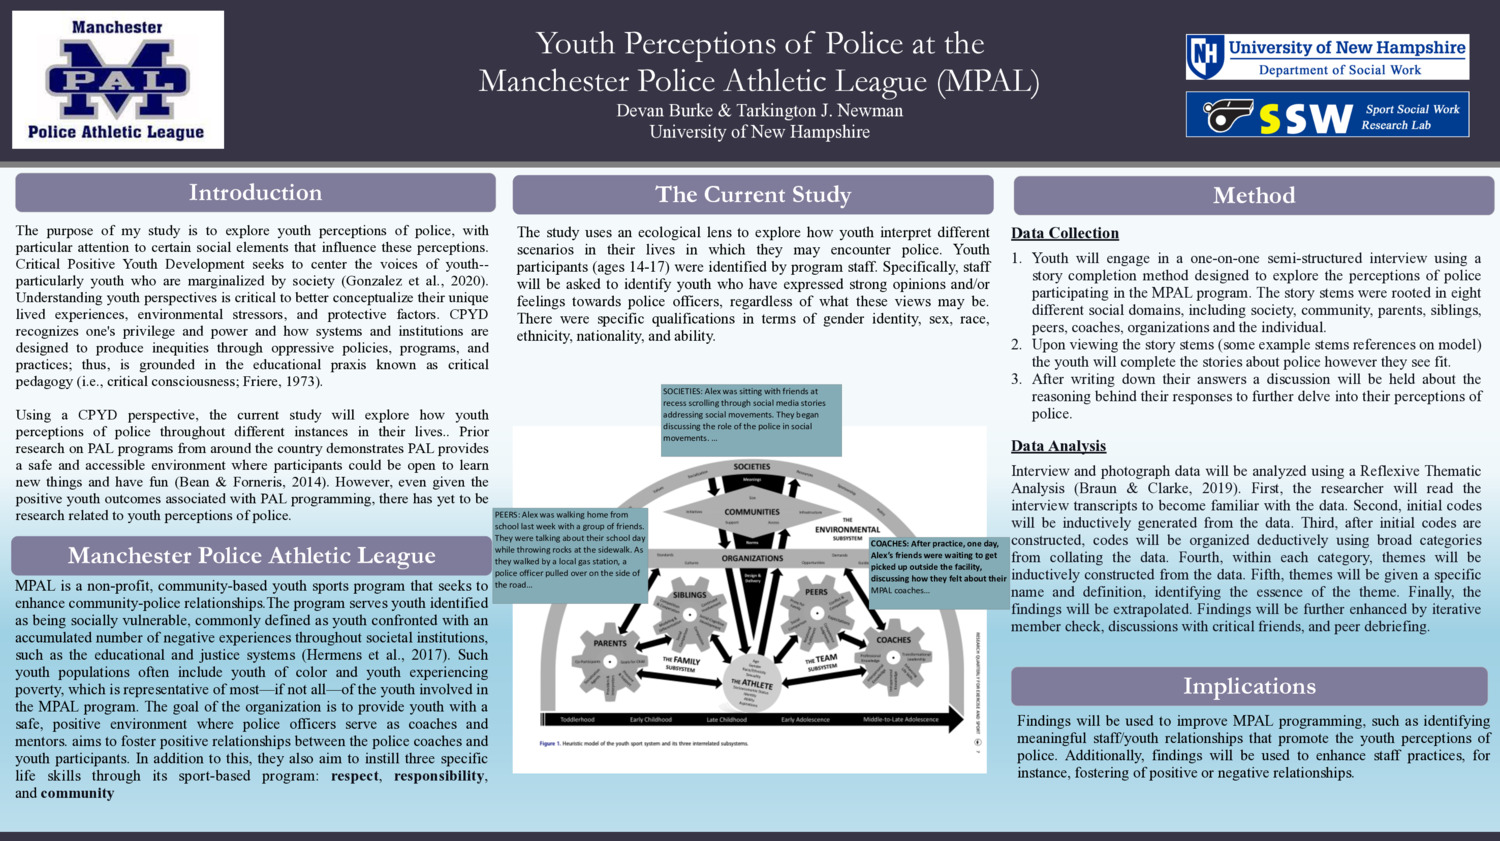 Youth Perceptions Of Police At The Manchester Police Athletic League (Mpal) by db1201